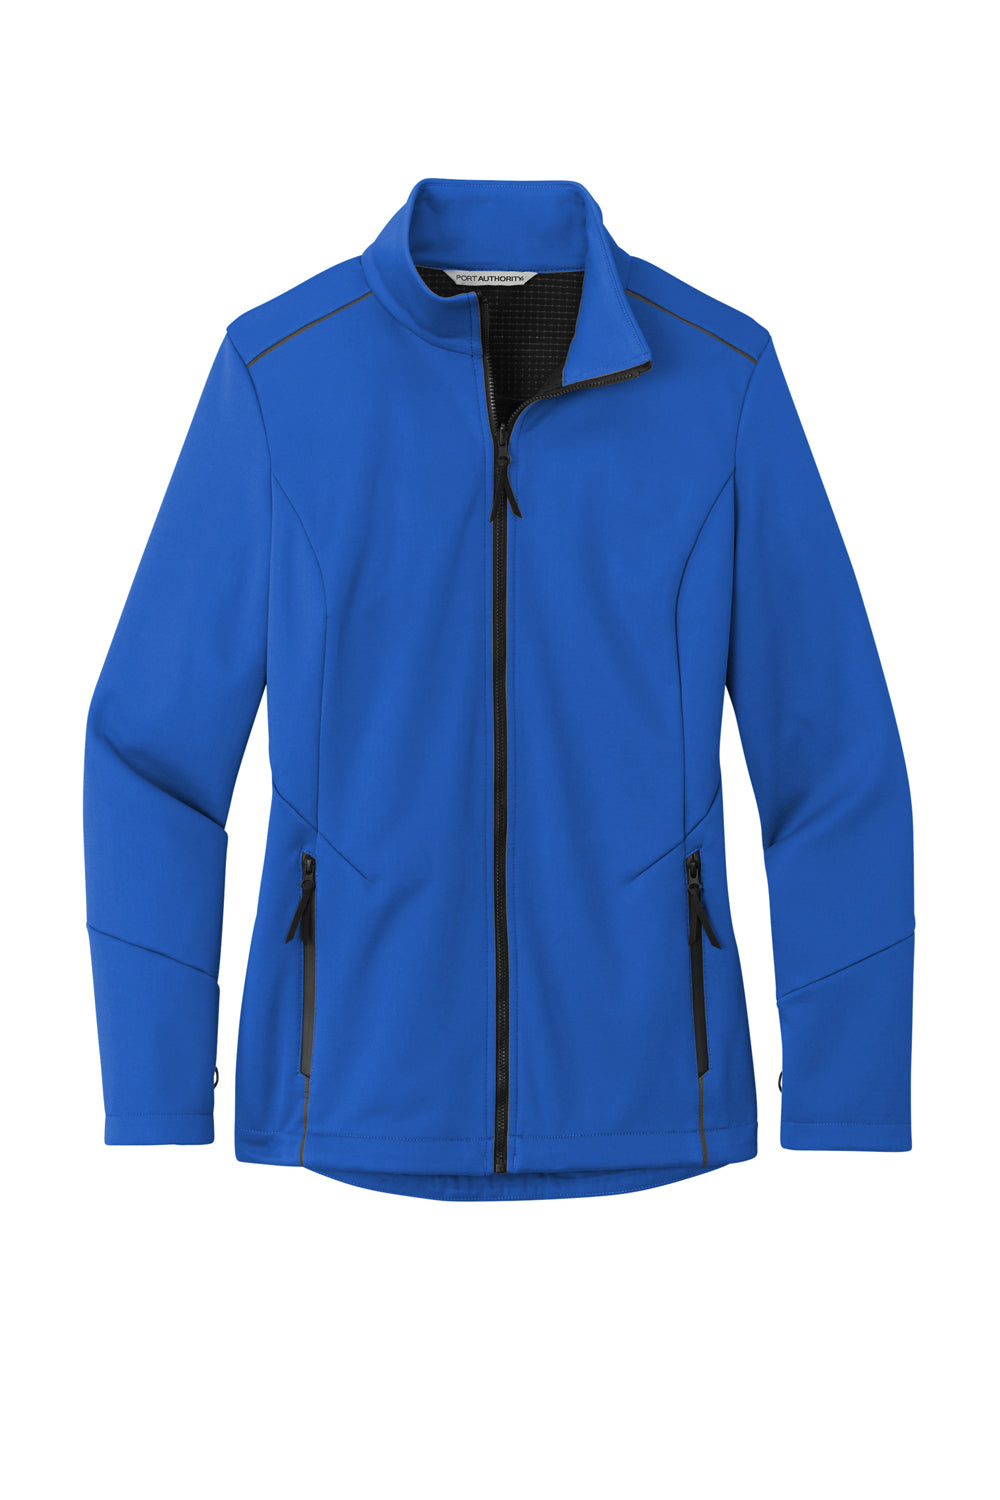 Port Authority L921 Collective Tech Full Zip Soft Shell Jacket True Royal Blue Flat Front